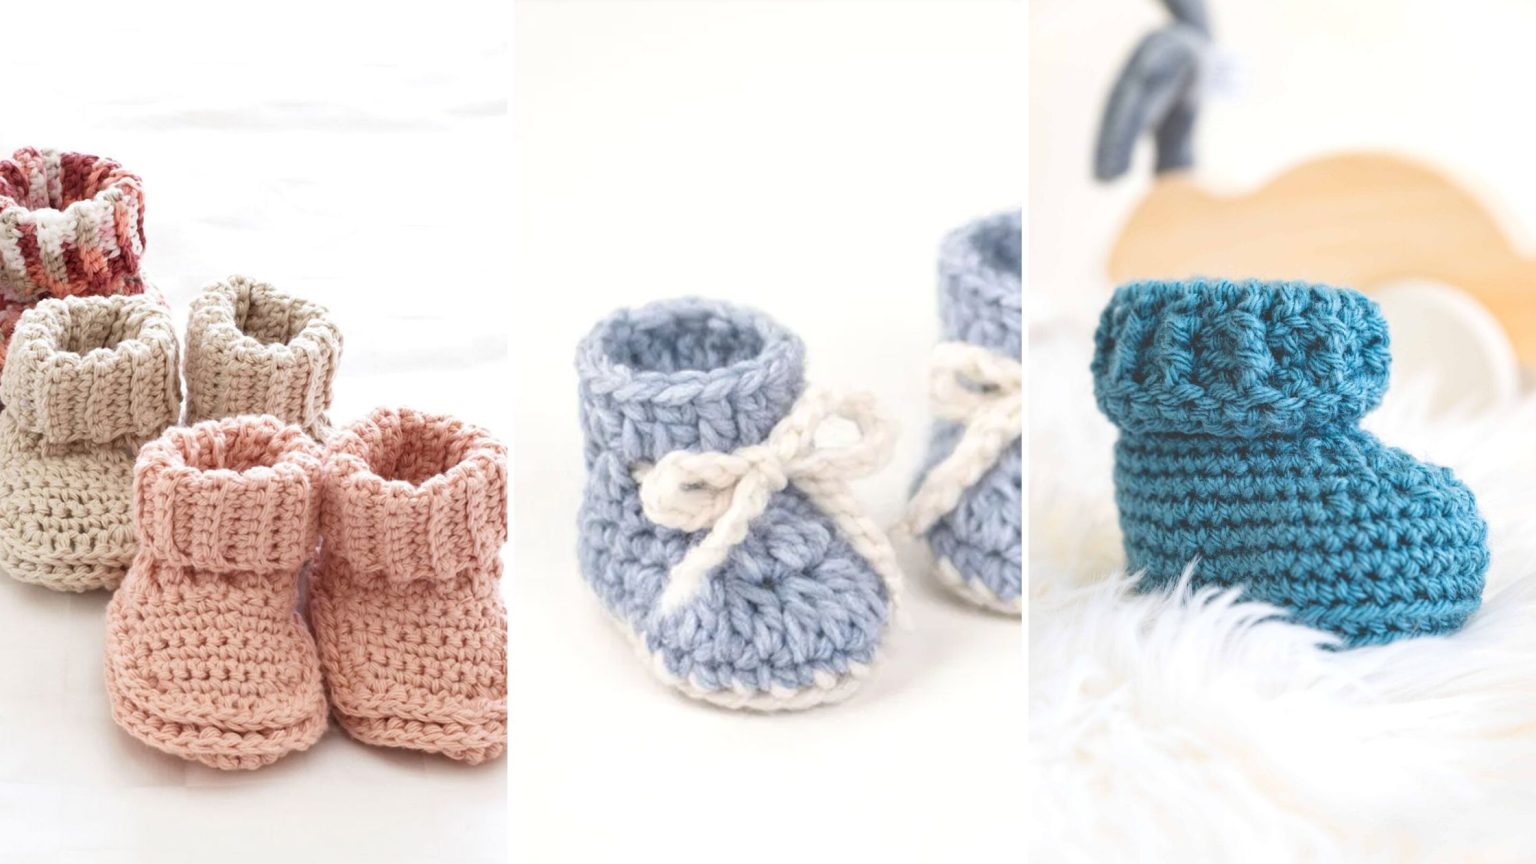 10 Classic Crochet Patterns for Baby Booties: Easy and Free - Easy ...